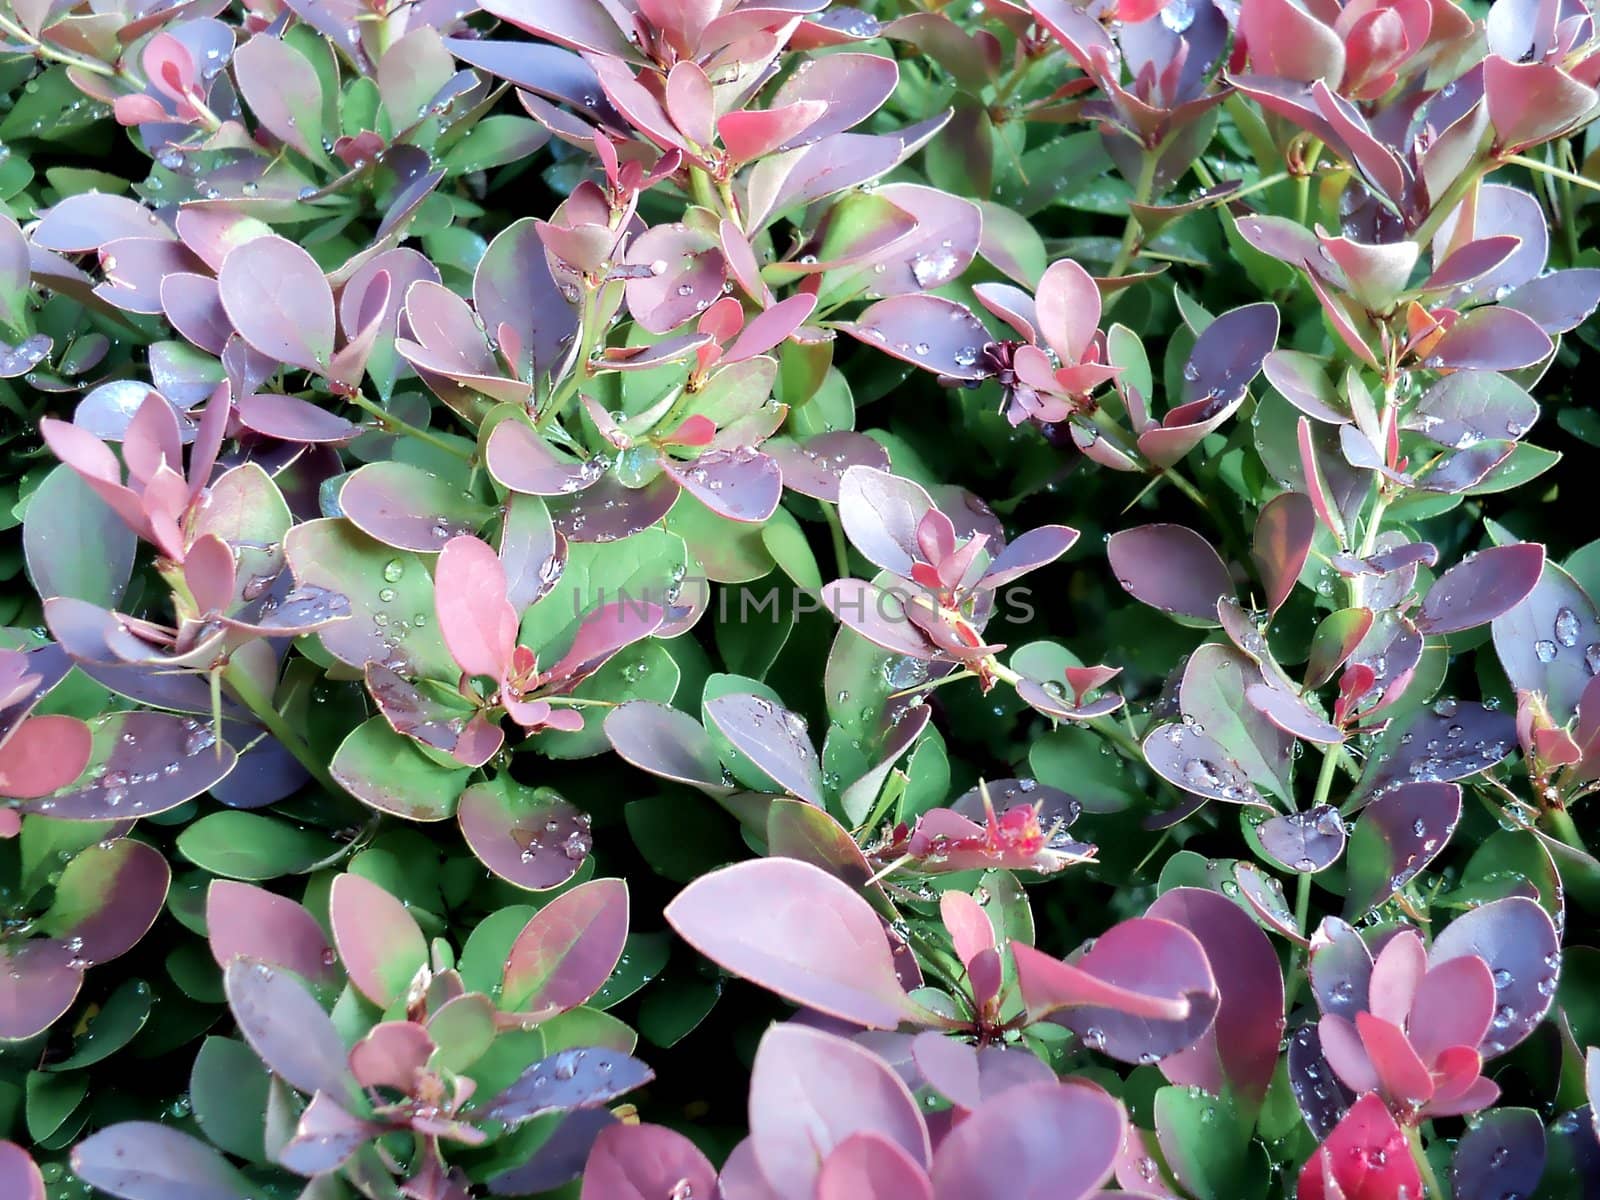 the general form of shrubby plants